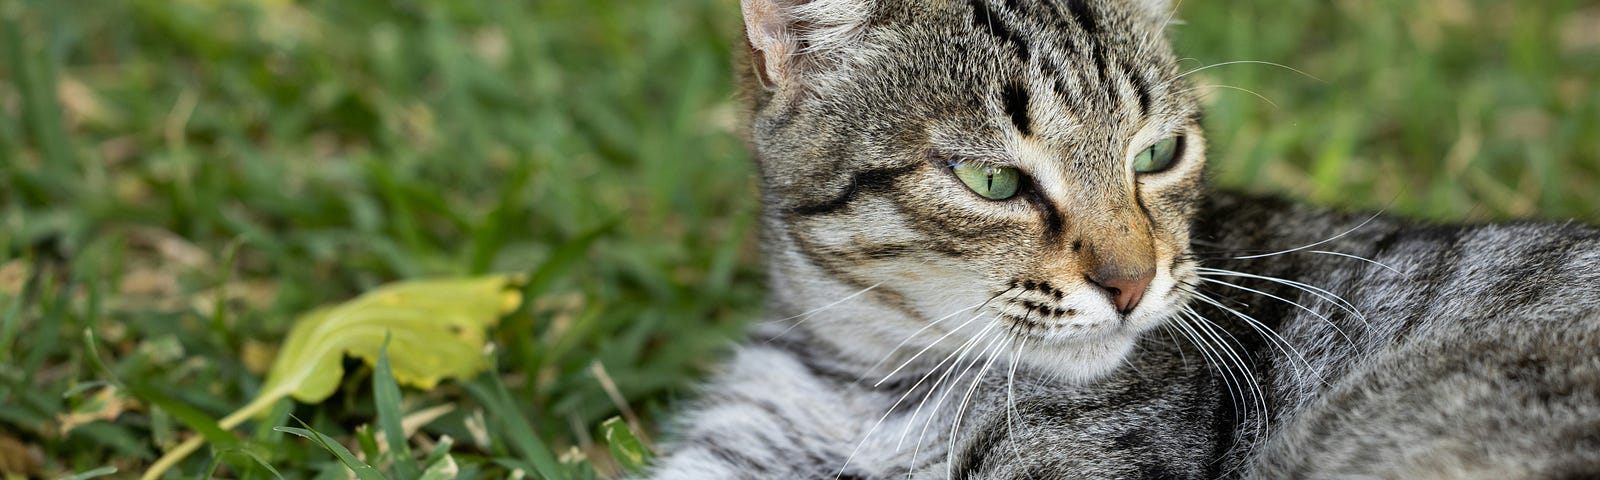 grey tabby cat curled up in short grass, head lifted to watch the world